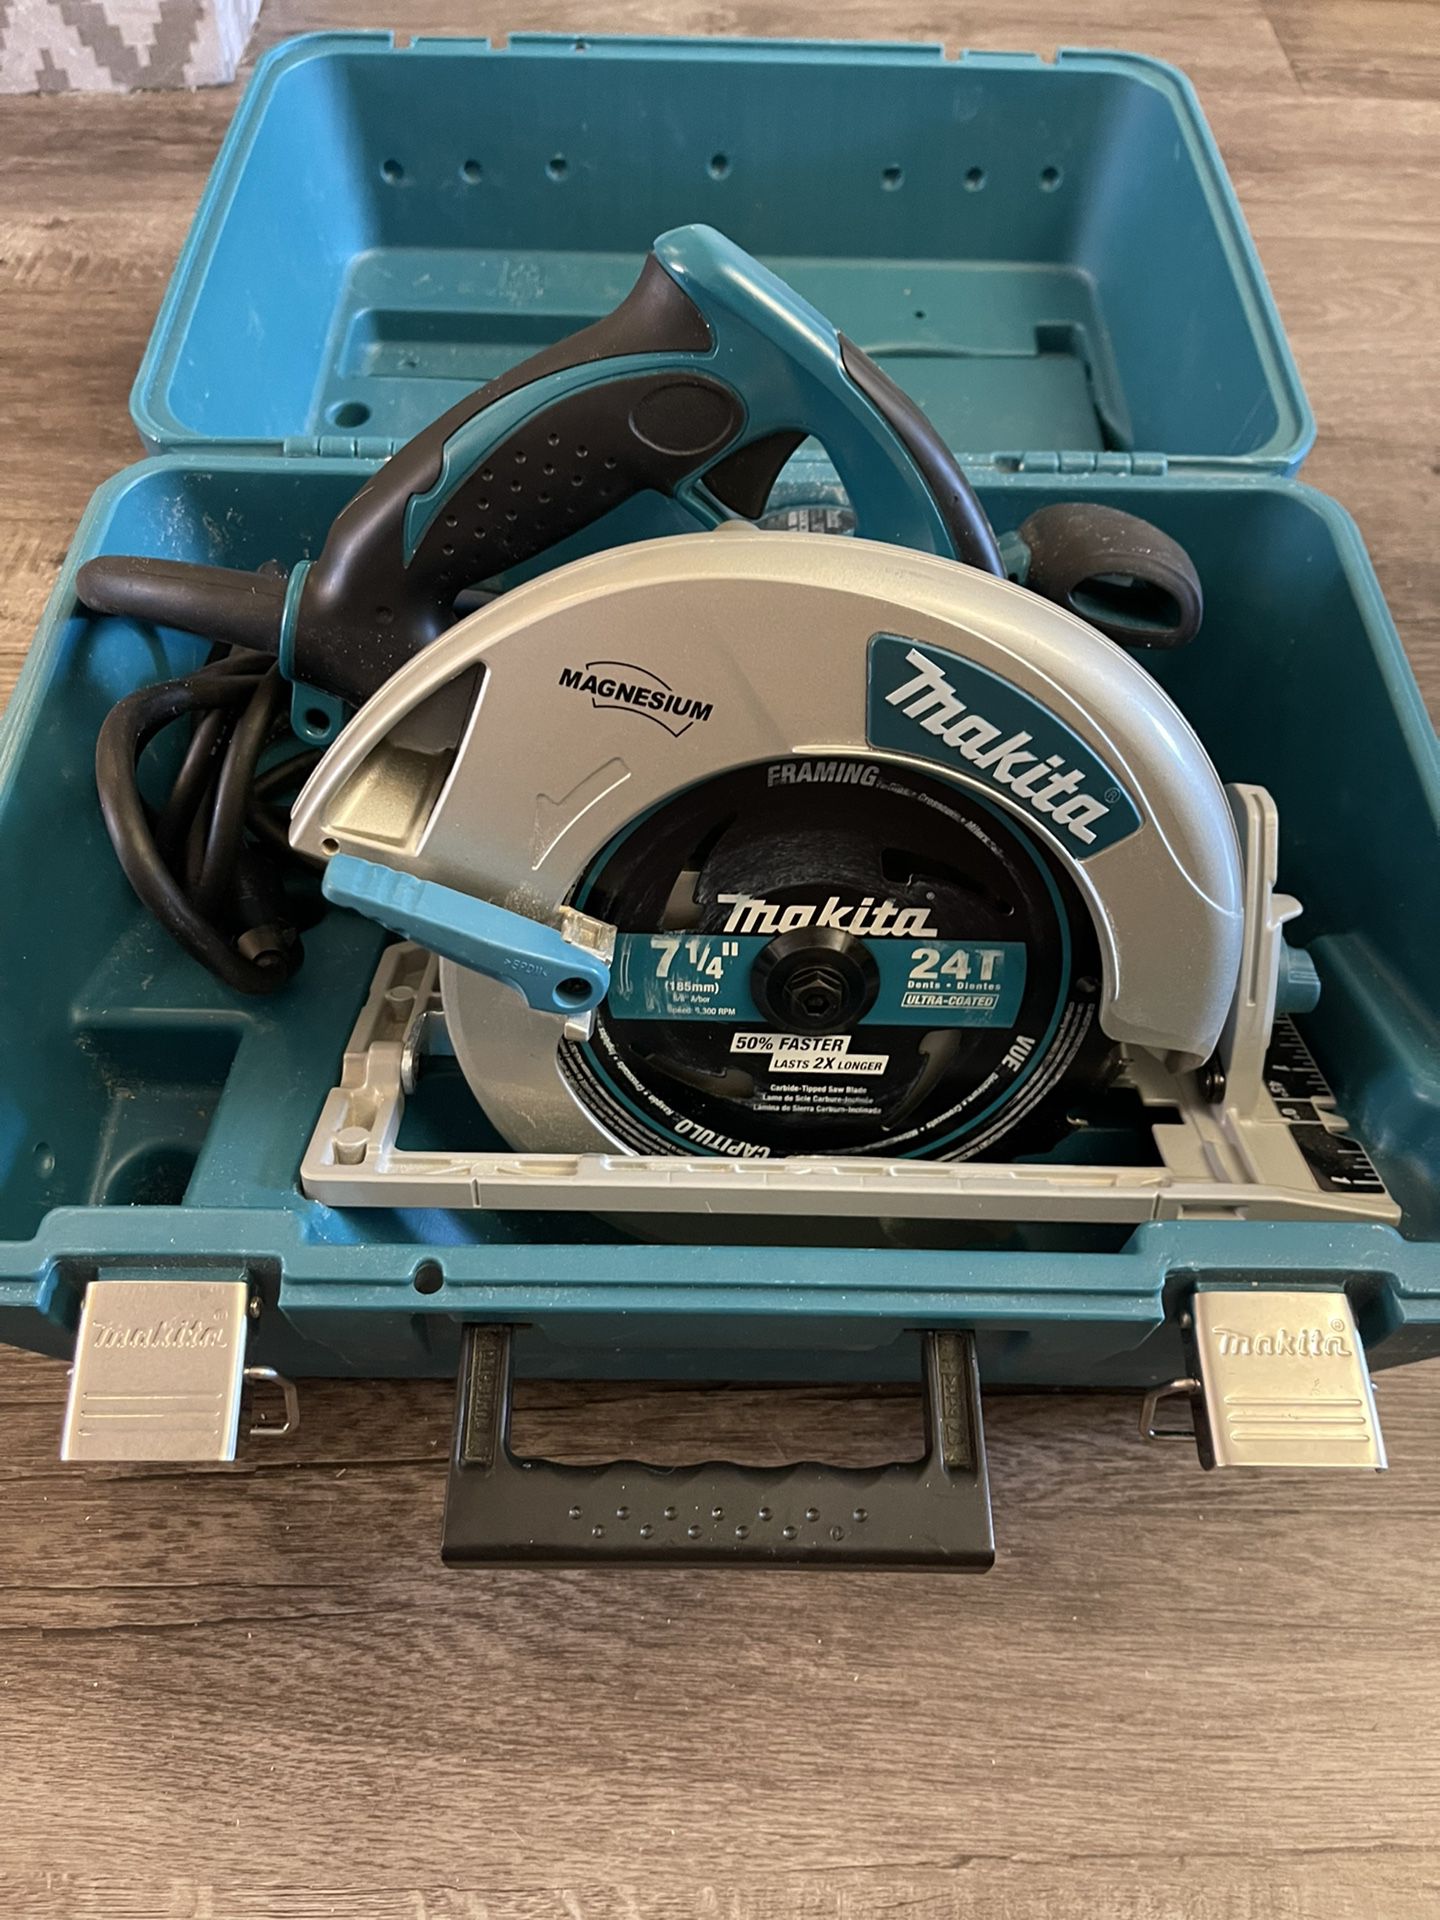 Makita 5007Mg Magnesium 7-1/4-Inch Circular Saw for Sale in Los Angeles, CA  OfferUp